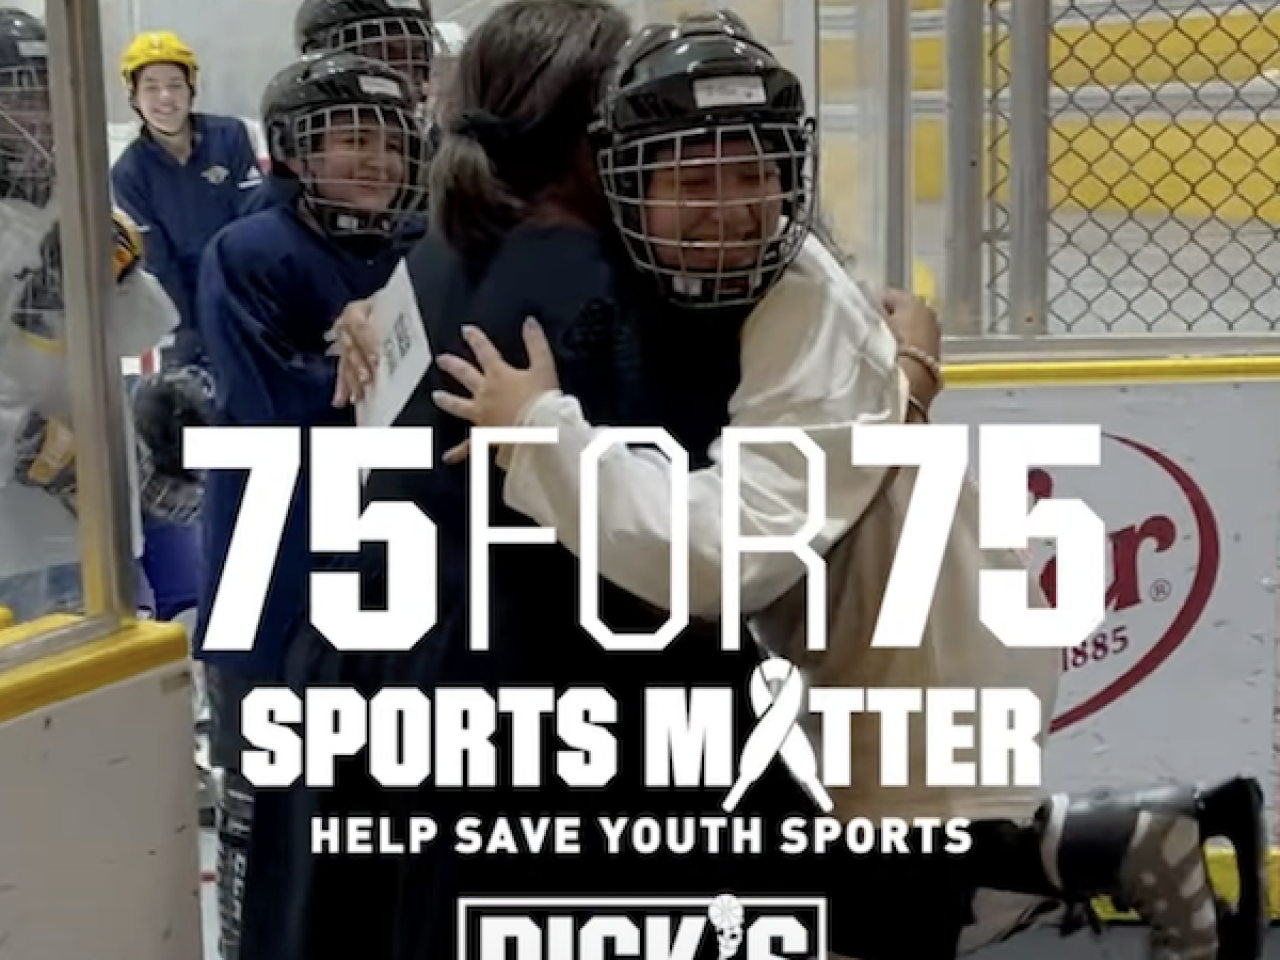 75For75 Sports Matter: Help Save Youth Sports.